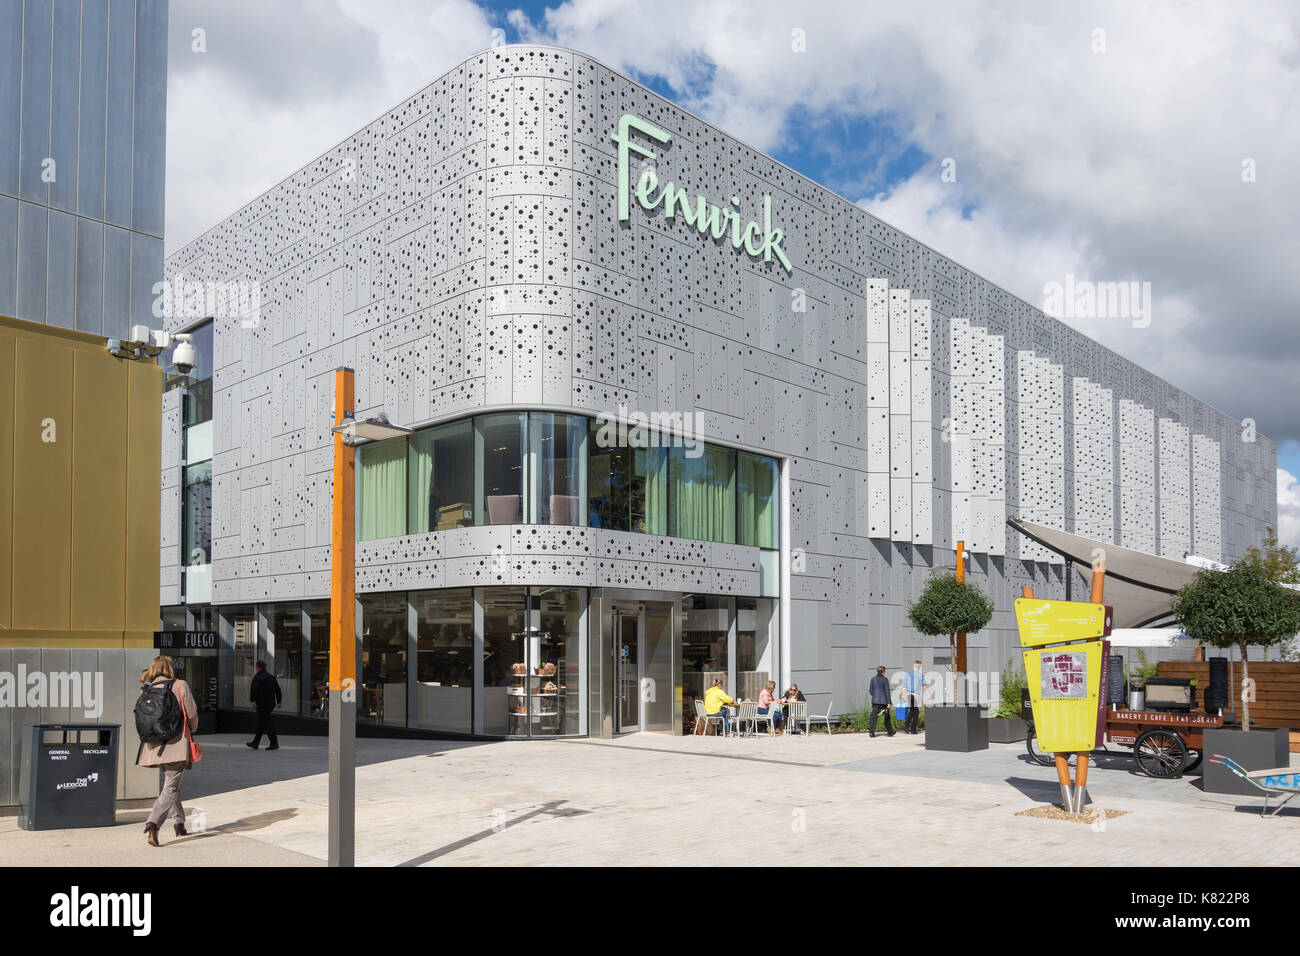 Fenwick department store, Town Square, The Lexicon, Bracknell, Berkshire, England, United Kingdom Stock Photo